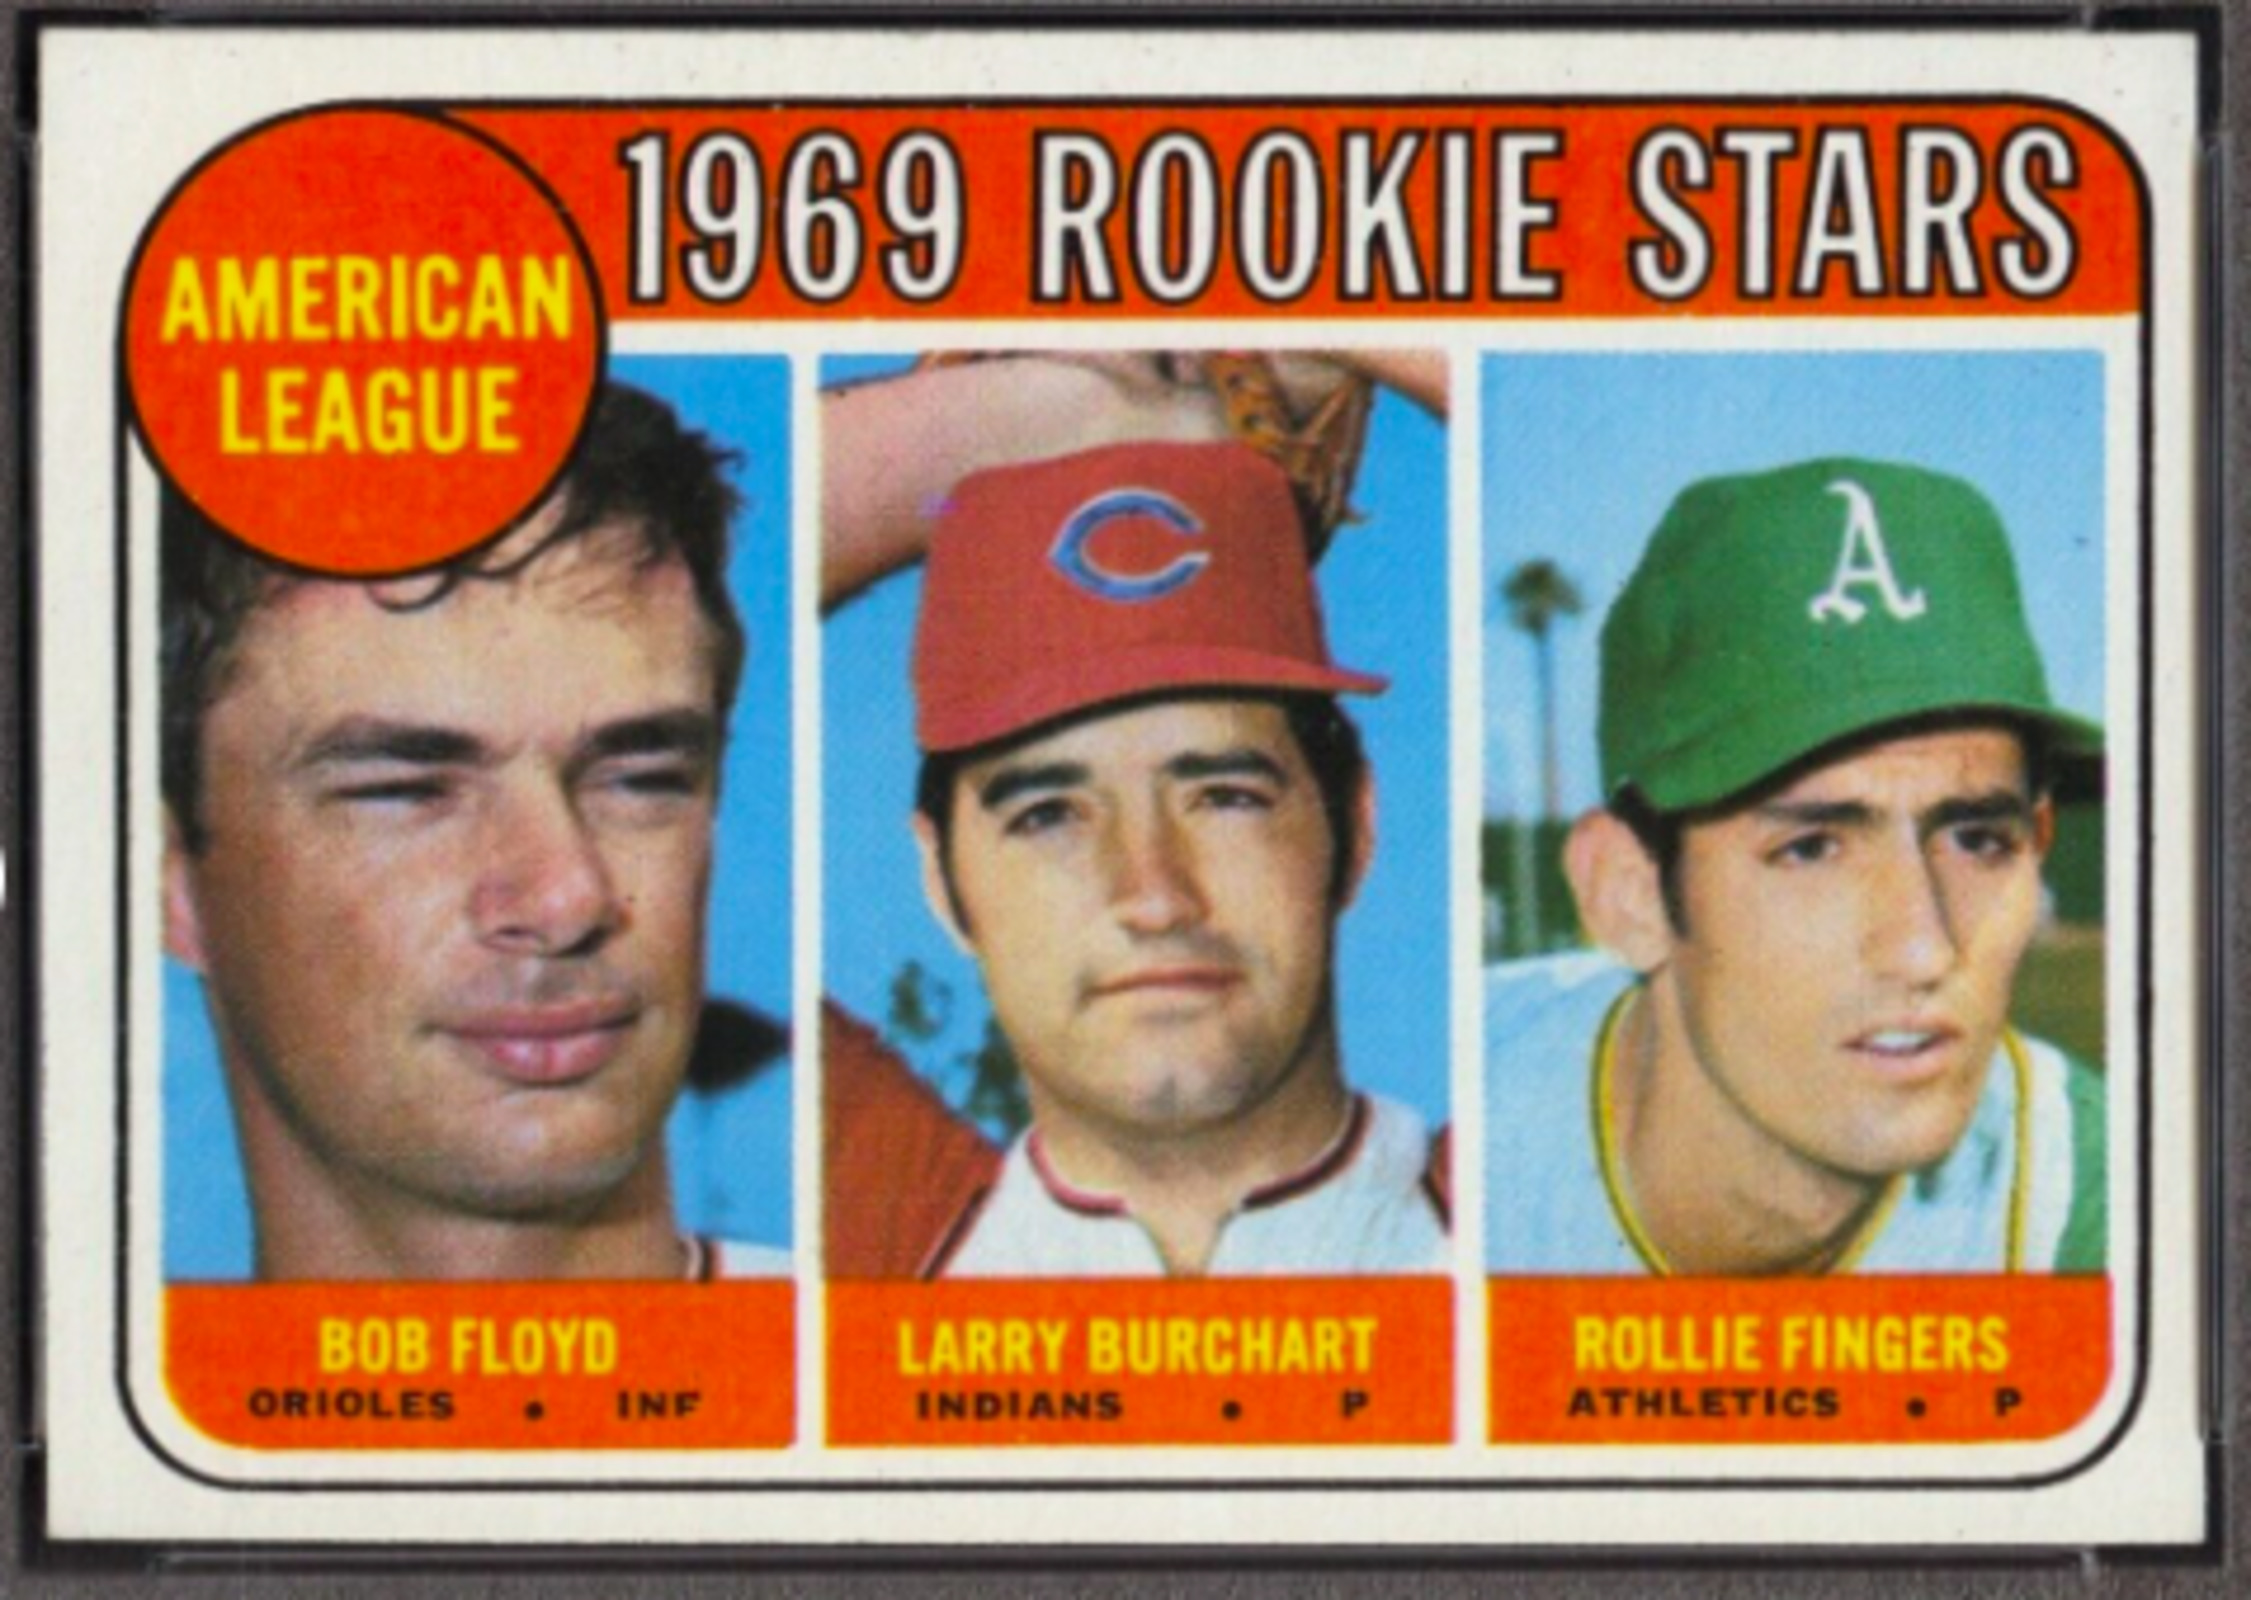 1969 Topps Rollie Fingers rookie card